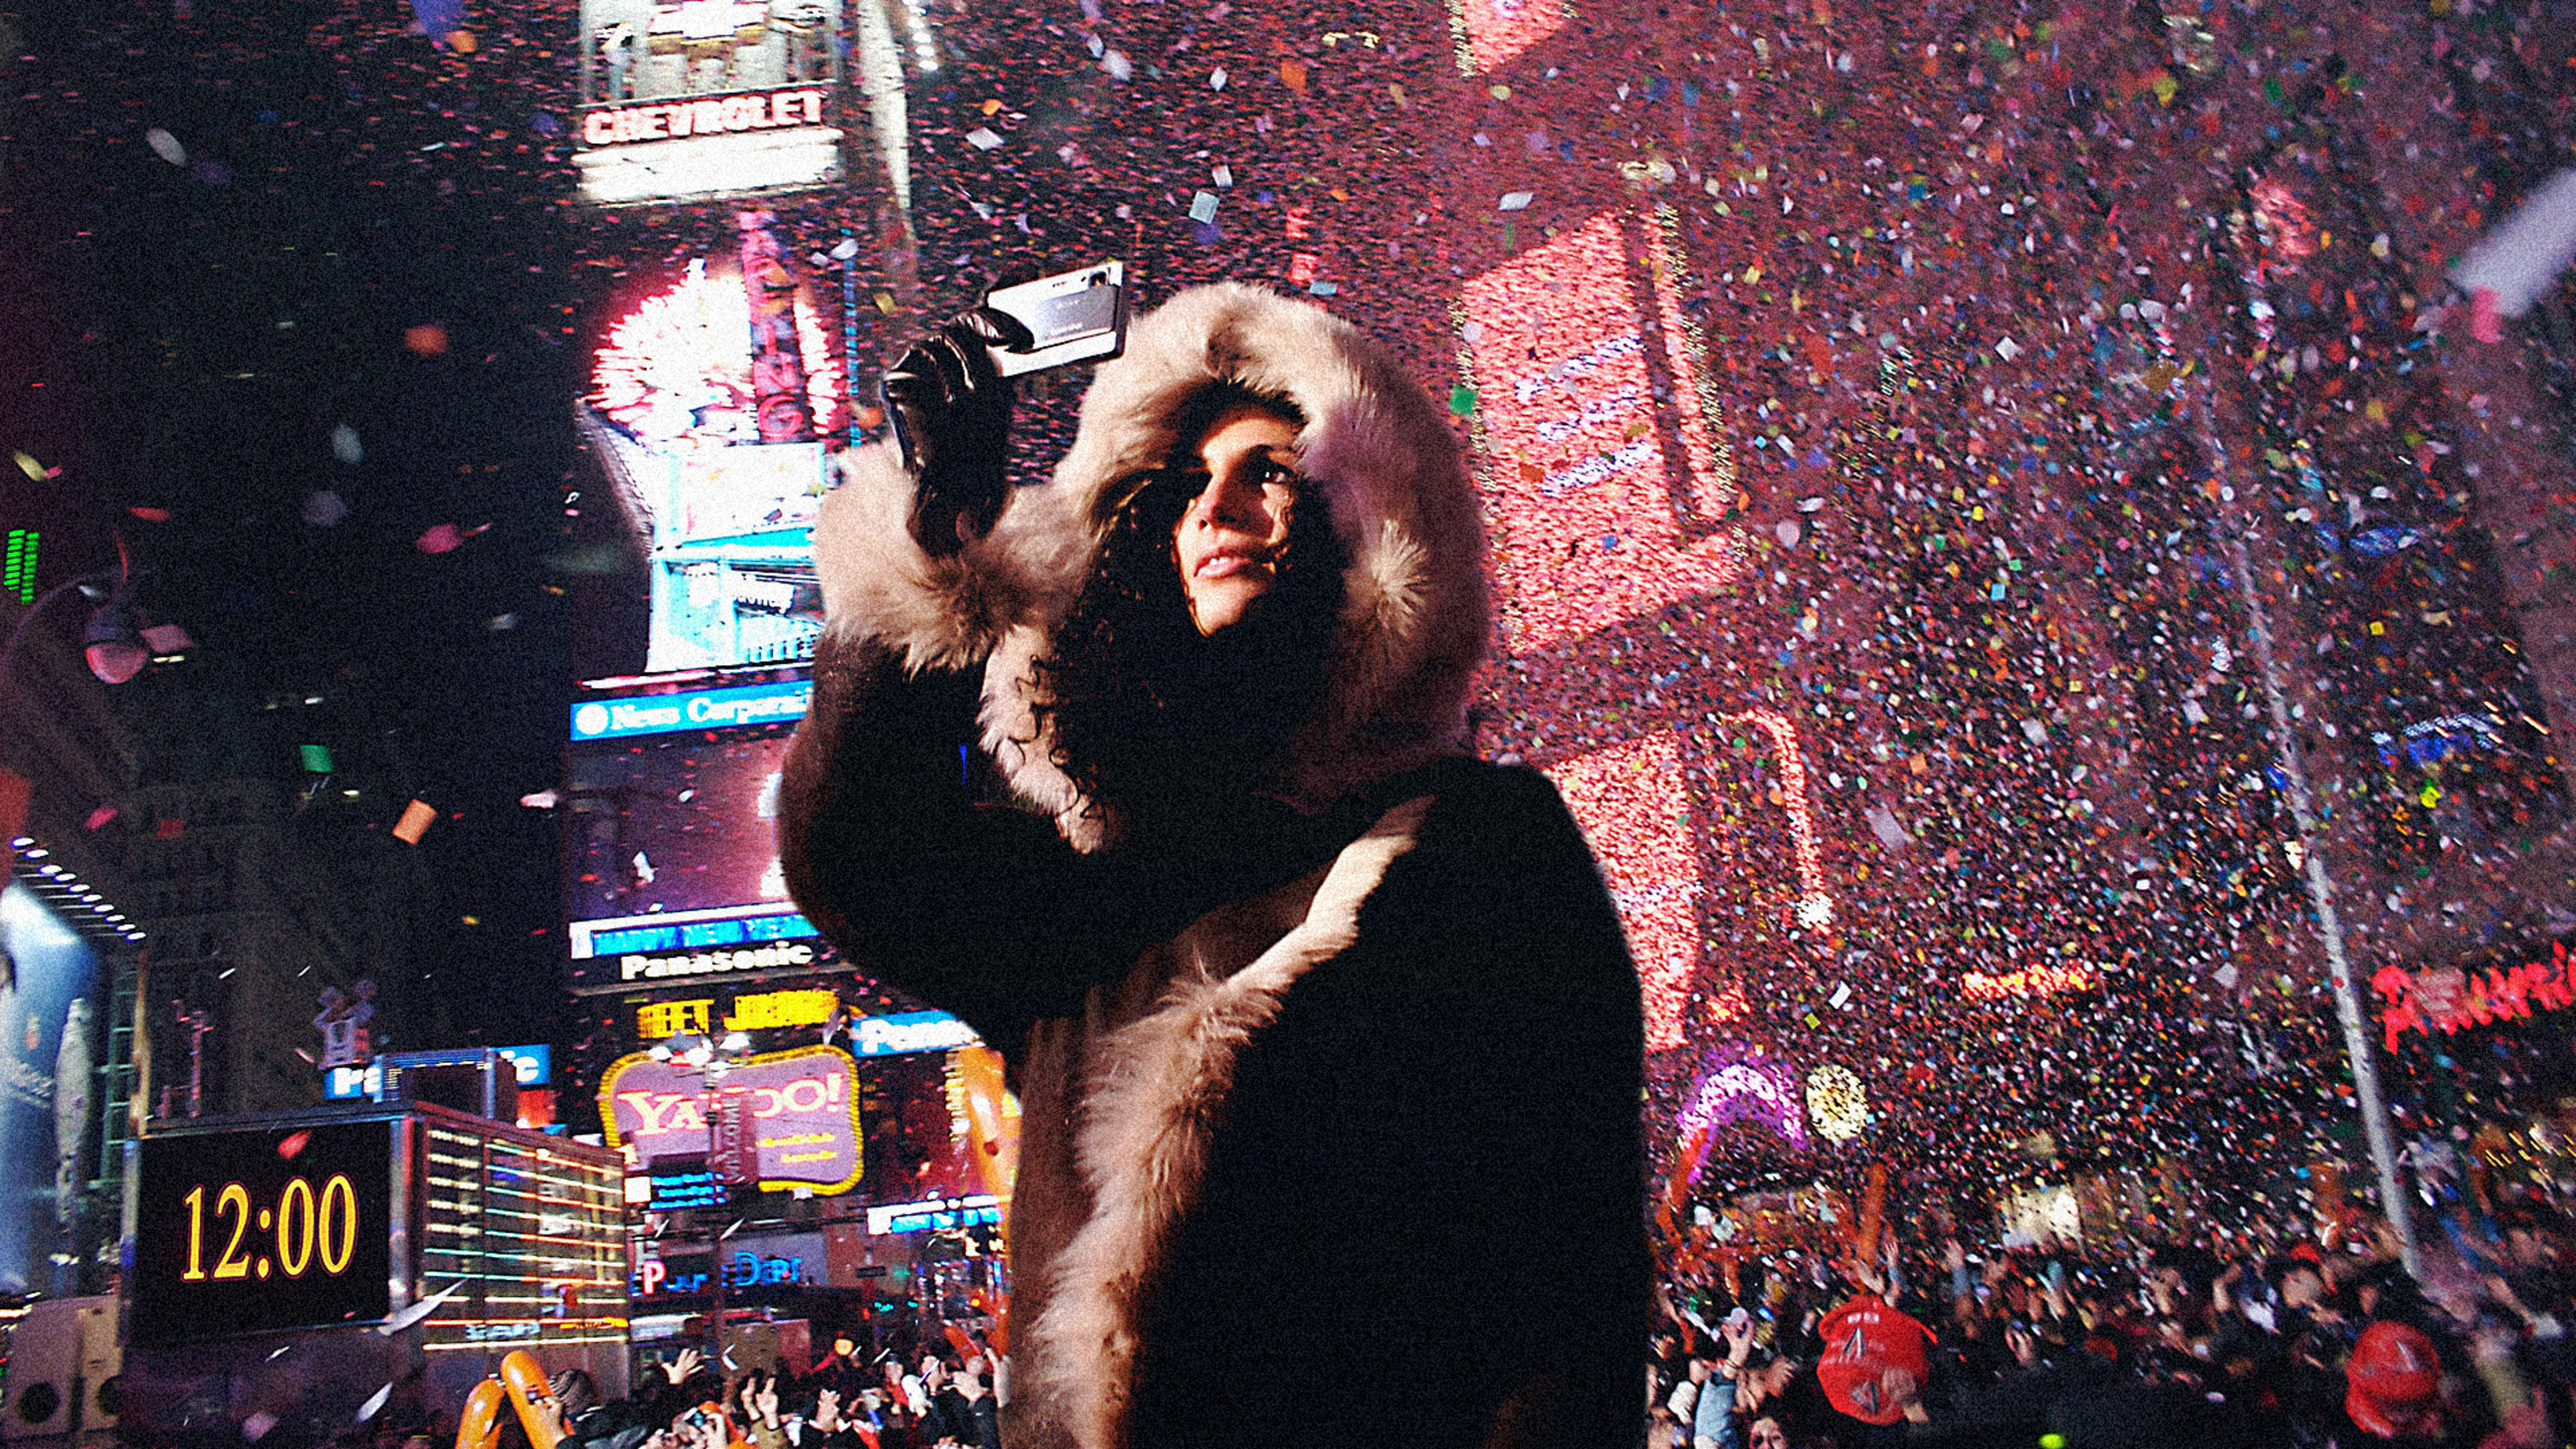 New Year’s Eve live stream 2022: How to watch the NYC ball drop, Times Square performances free